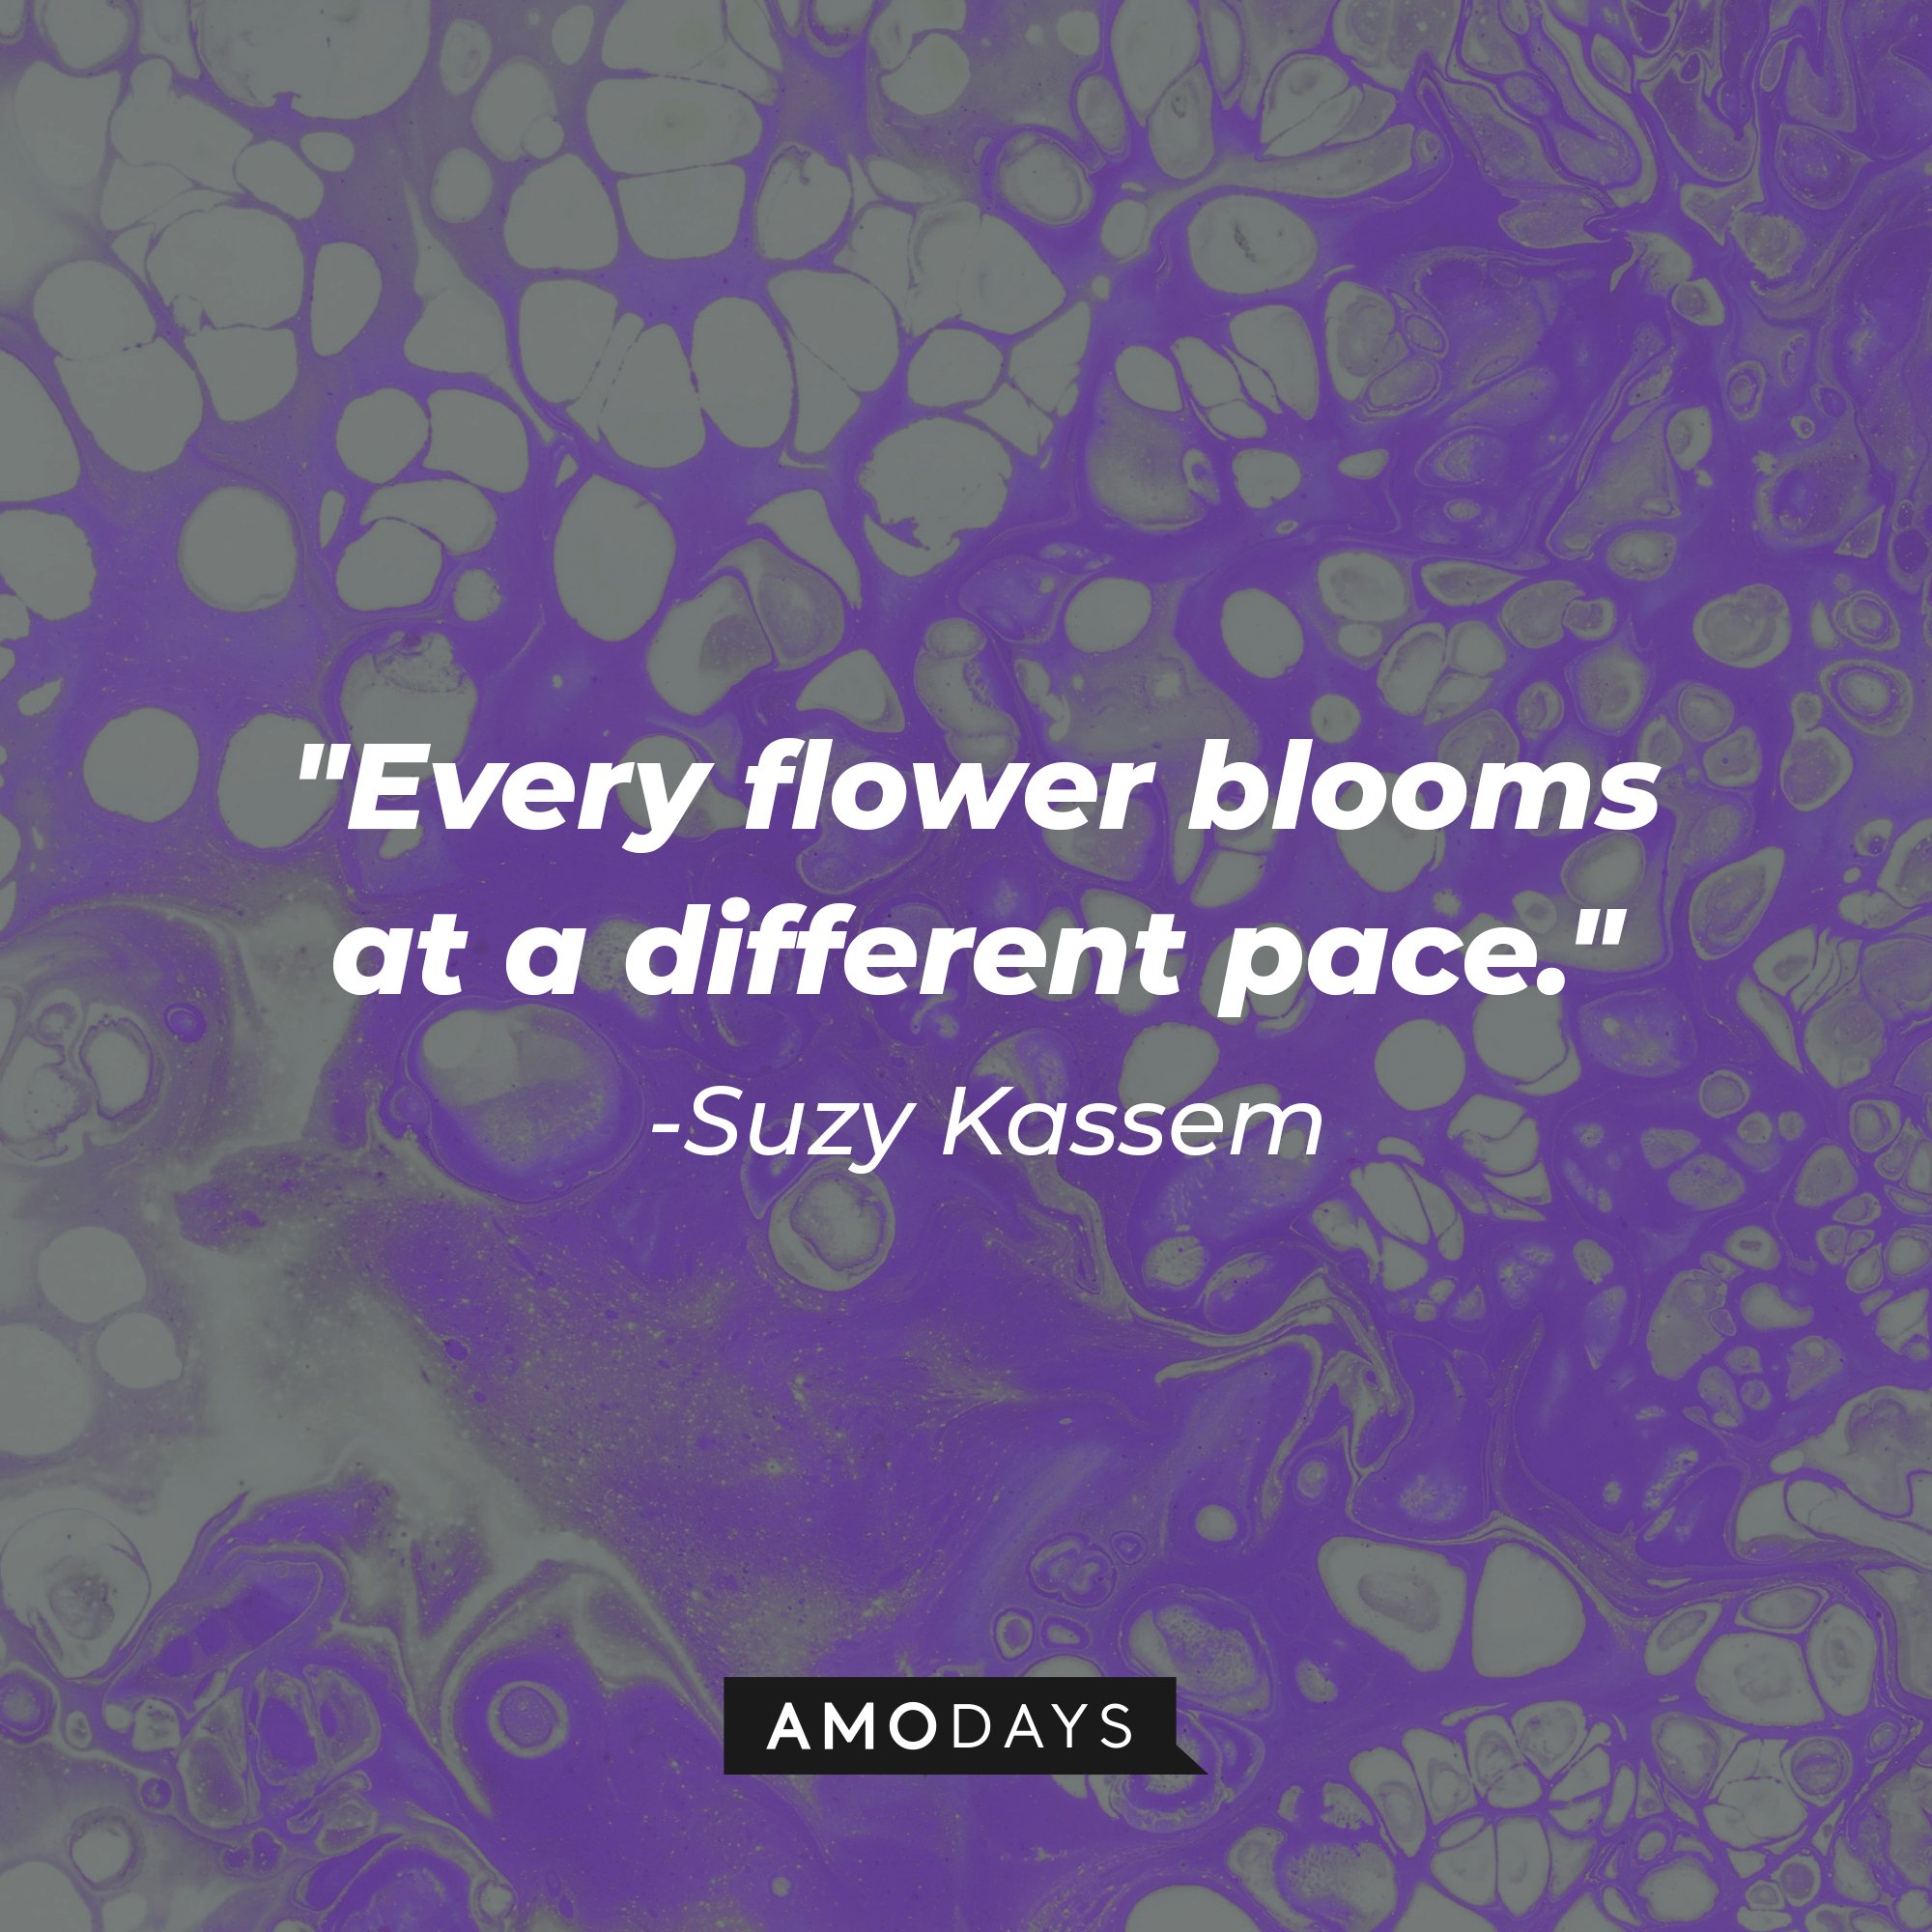 Suzy Kassem’s quote: "Every flower blooms at a different pace." | Image: AmoDays